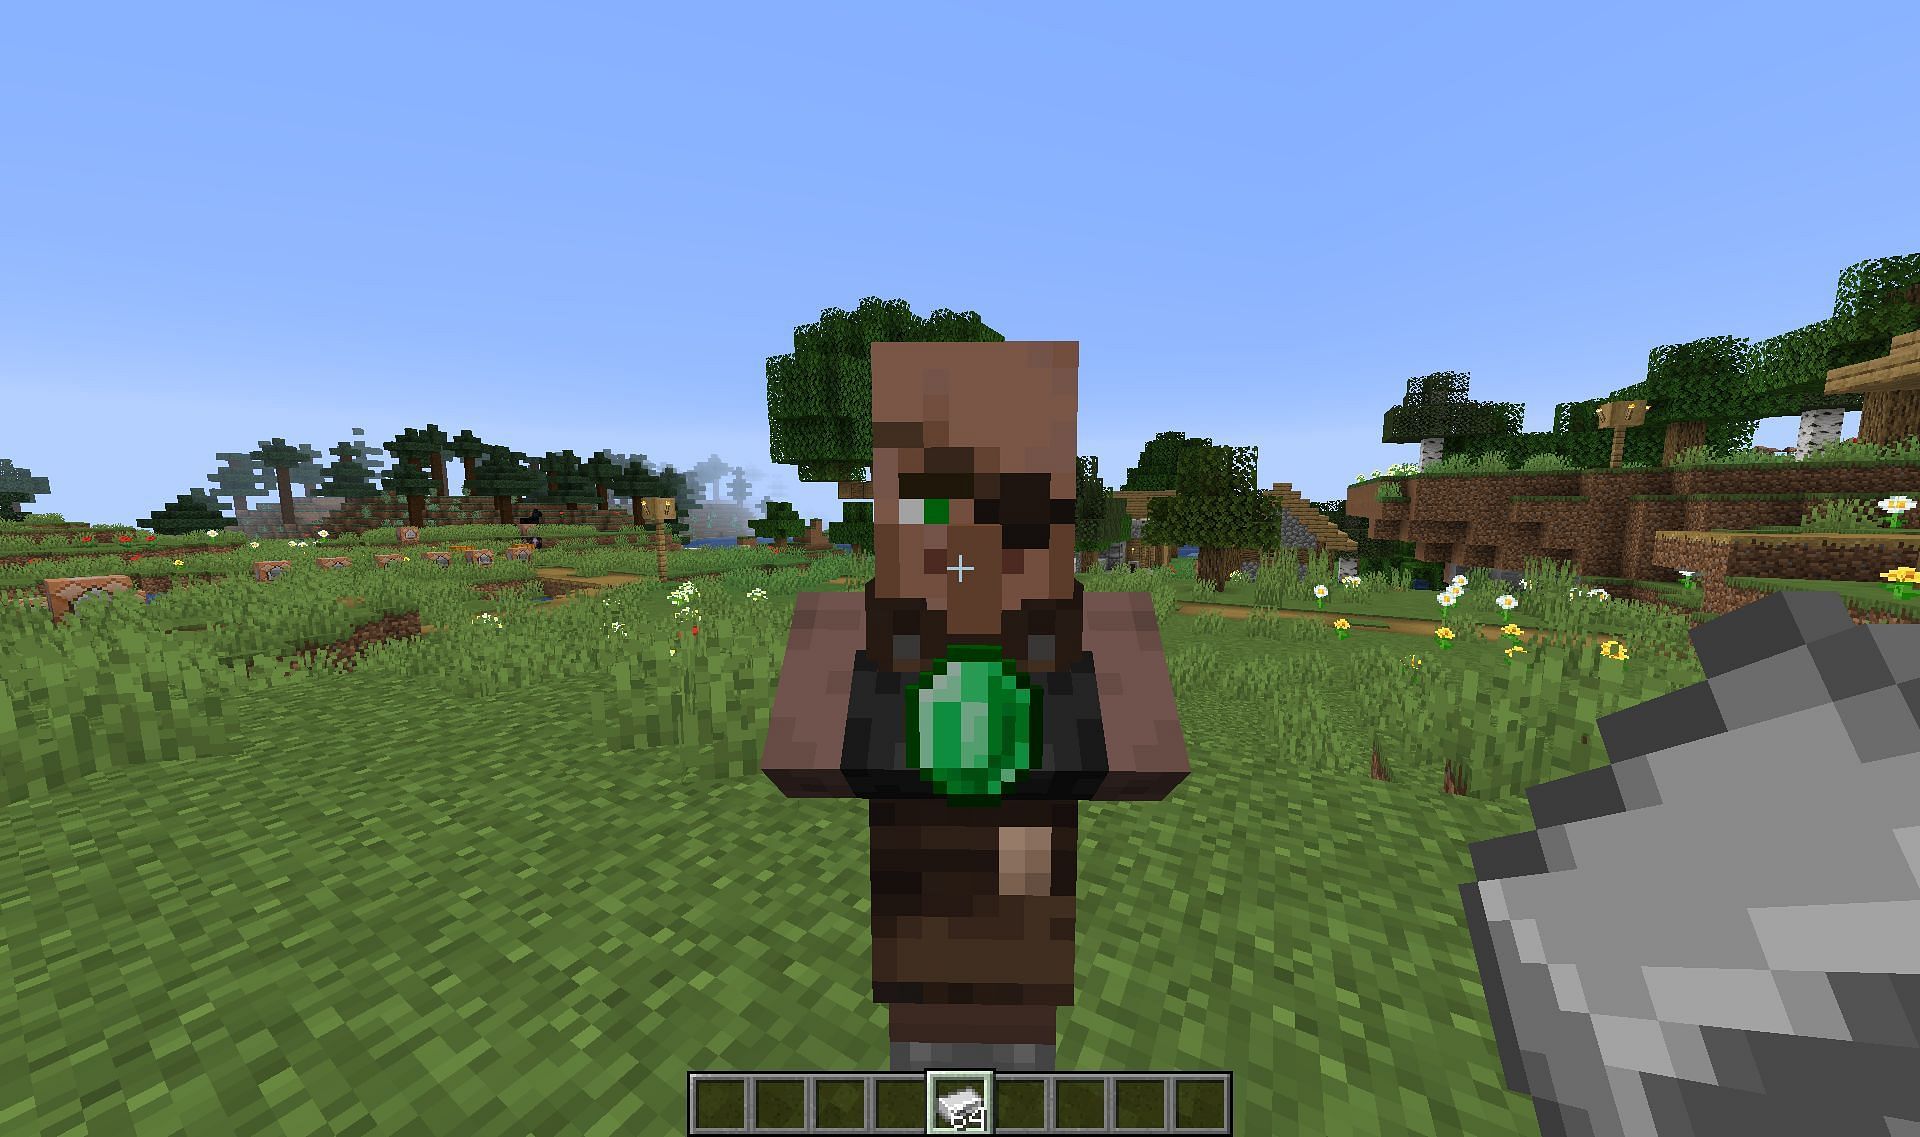 Trade with villager (Image via Minecraft)